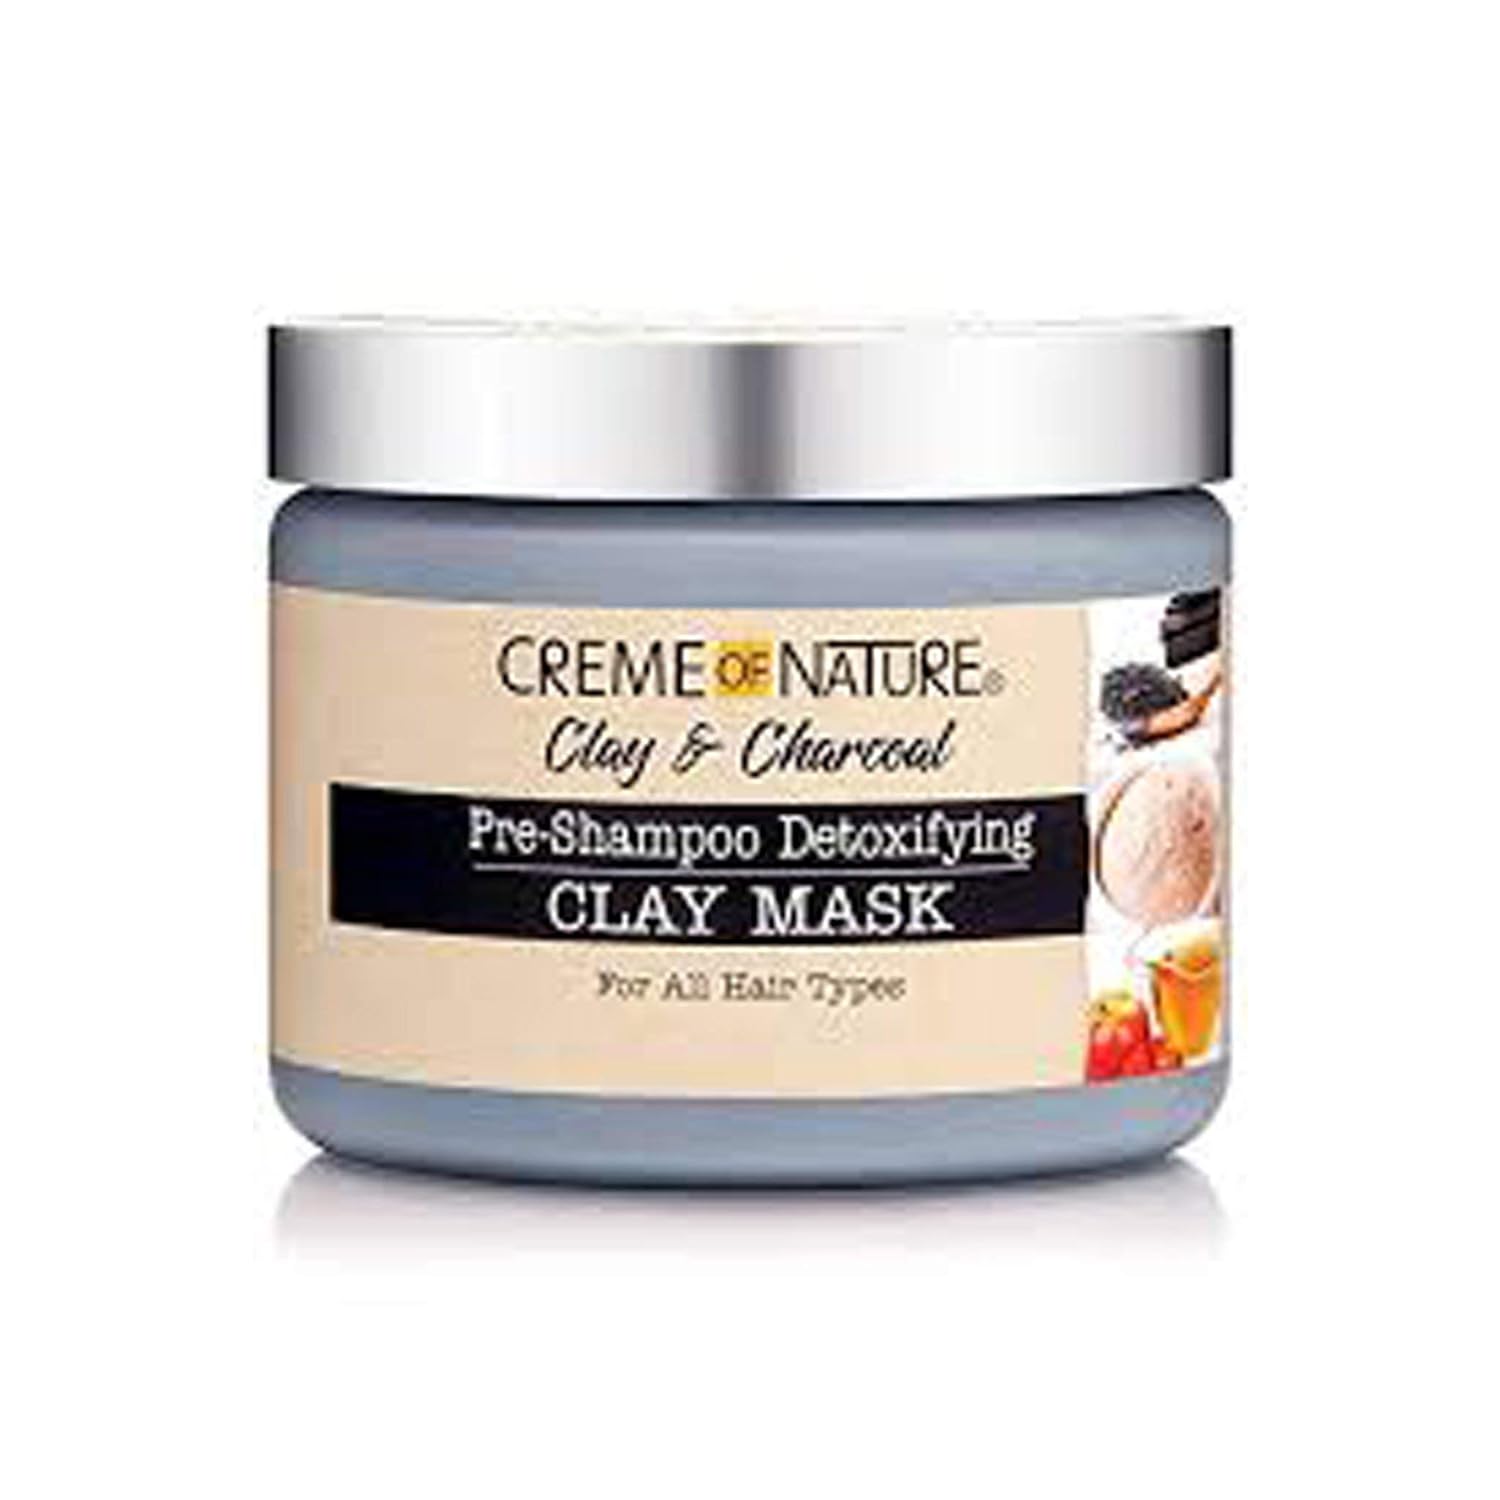 WHOLESALE CREME OF NATURE CLAY & CHARCOAL PRE-SHAMPOO DETOXIFYING CLAY MASK 11.5 OZ - 48 PIECE LOT